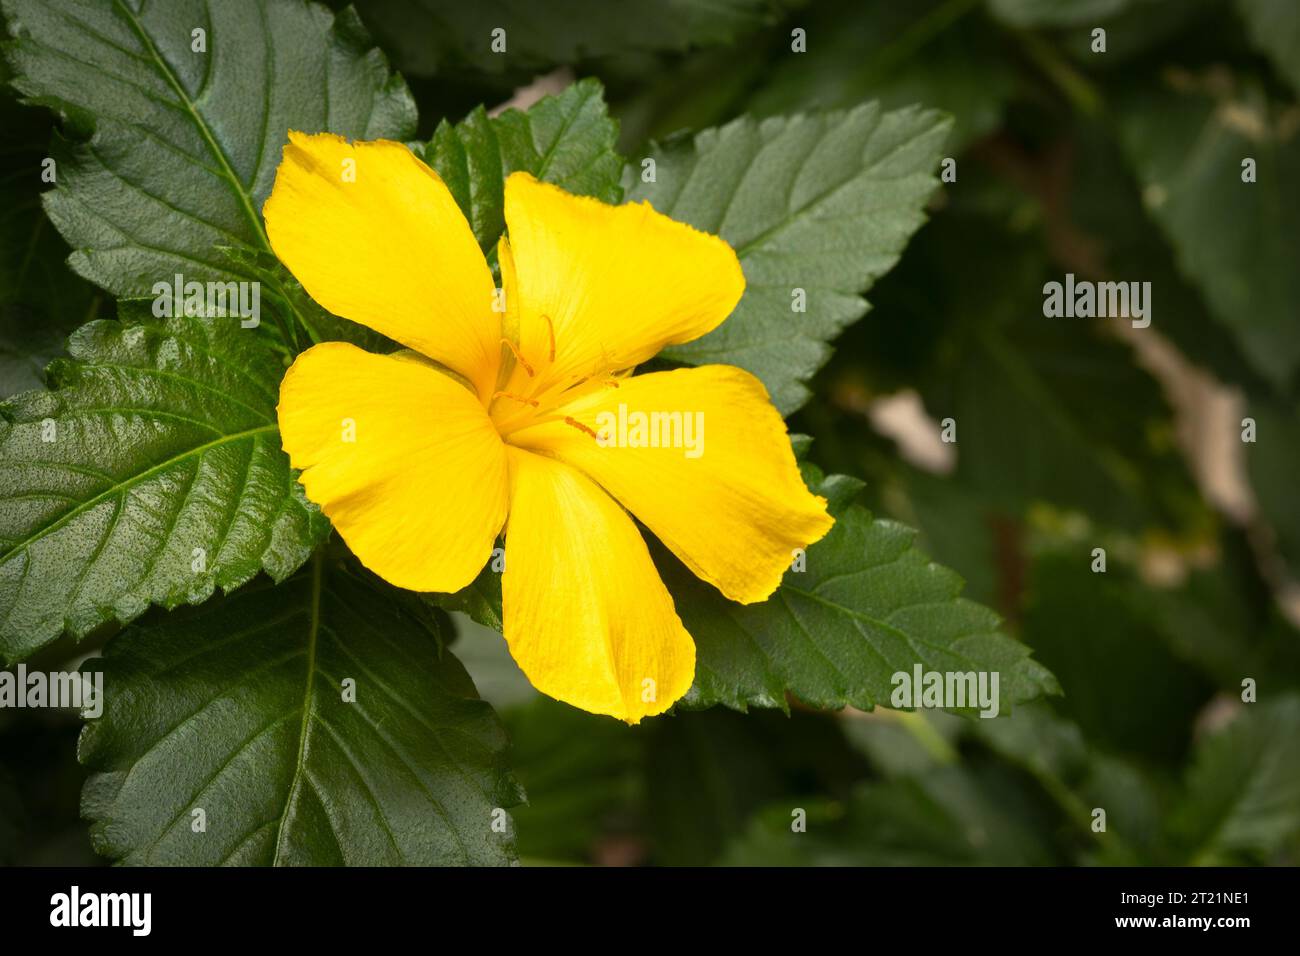 view of a yellow flower: Turnera, close-up Stock Photo